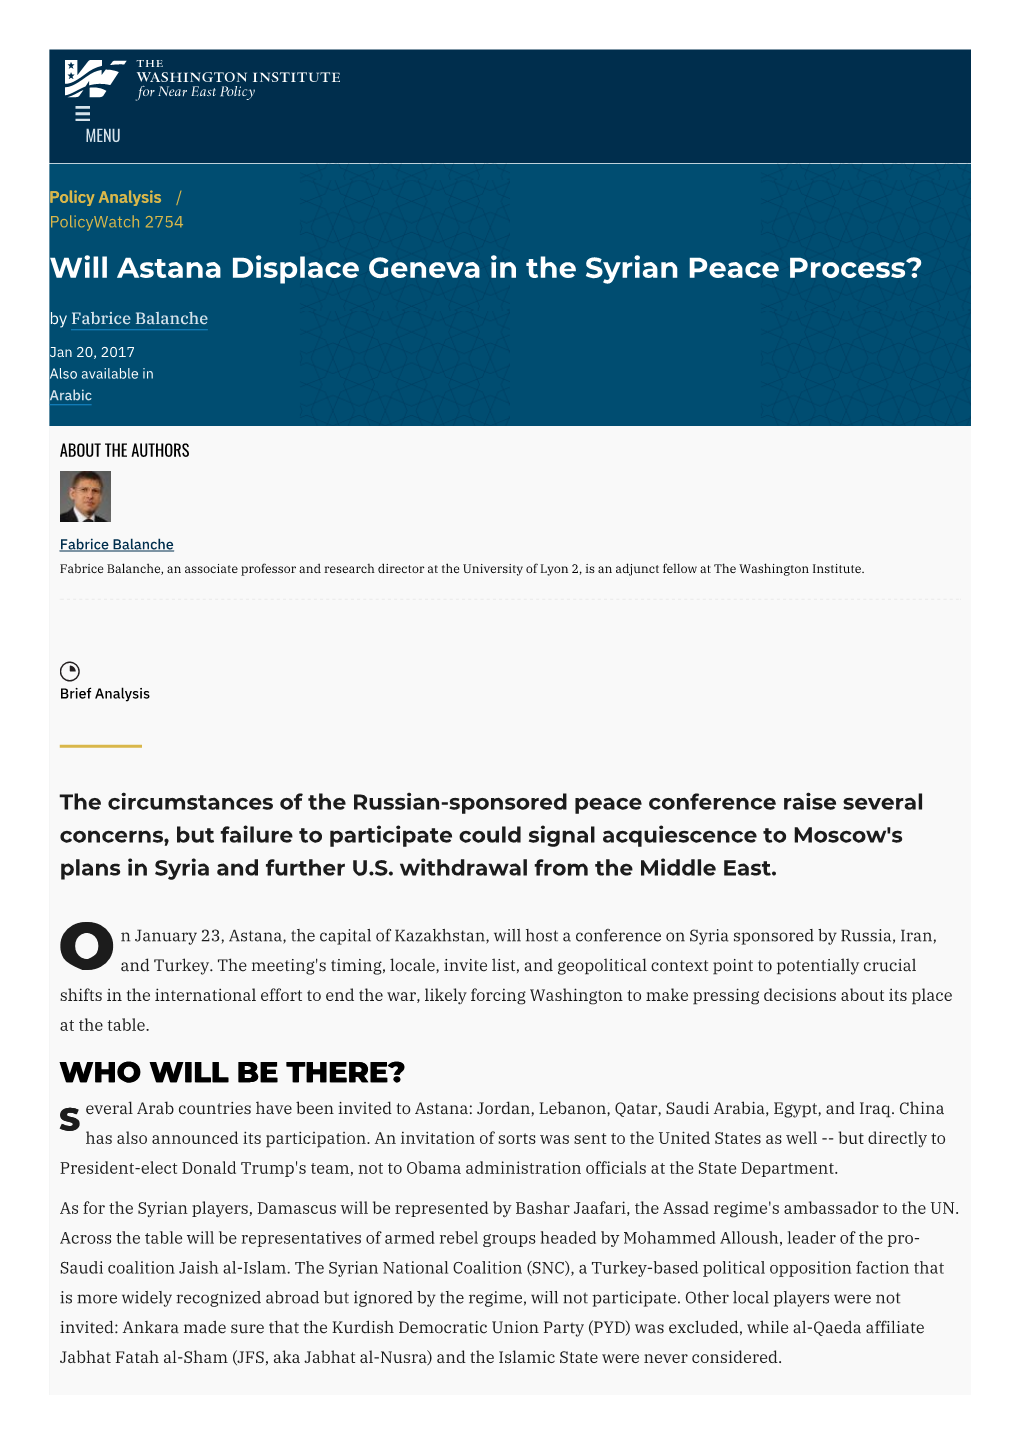 Will Astana Displace Geneva in the Syrian Peace Process? by Fabrice Balanche